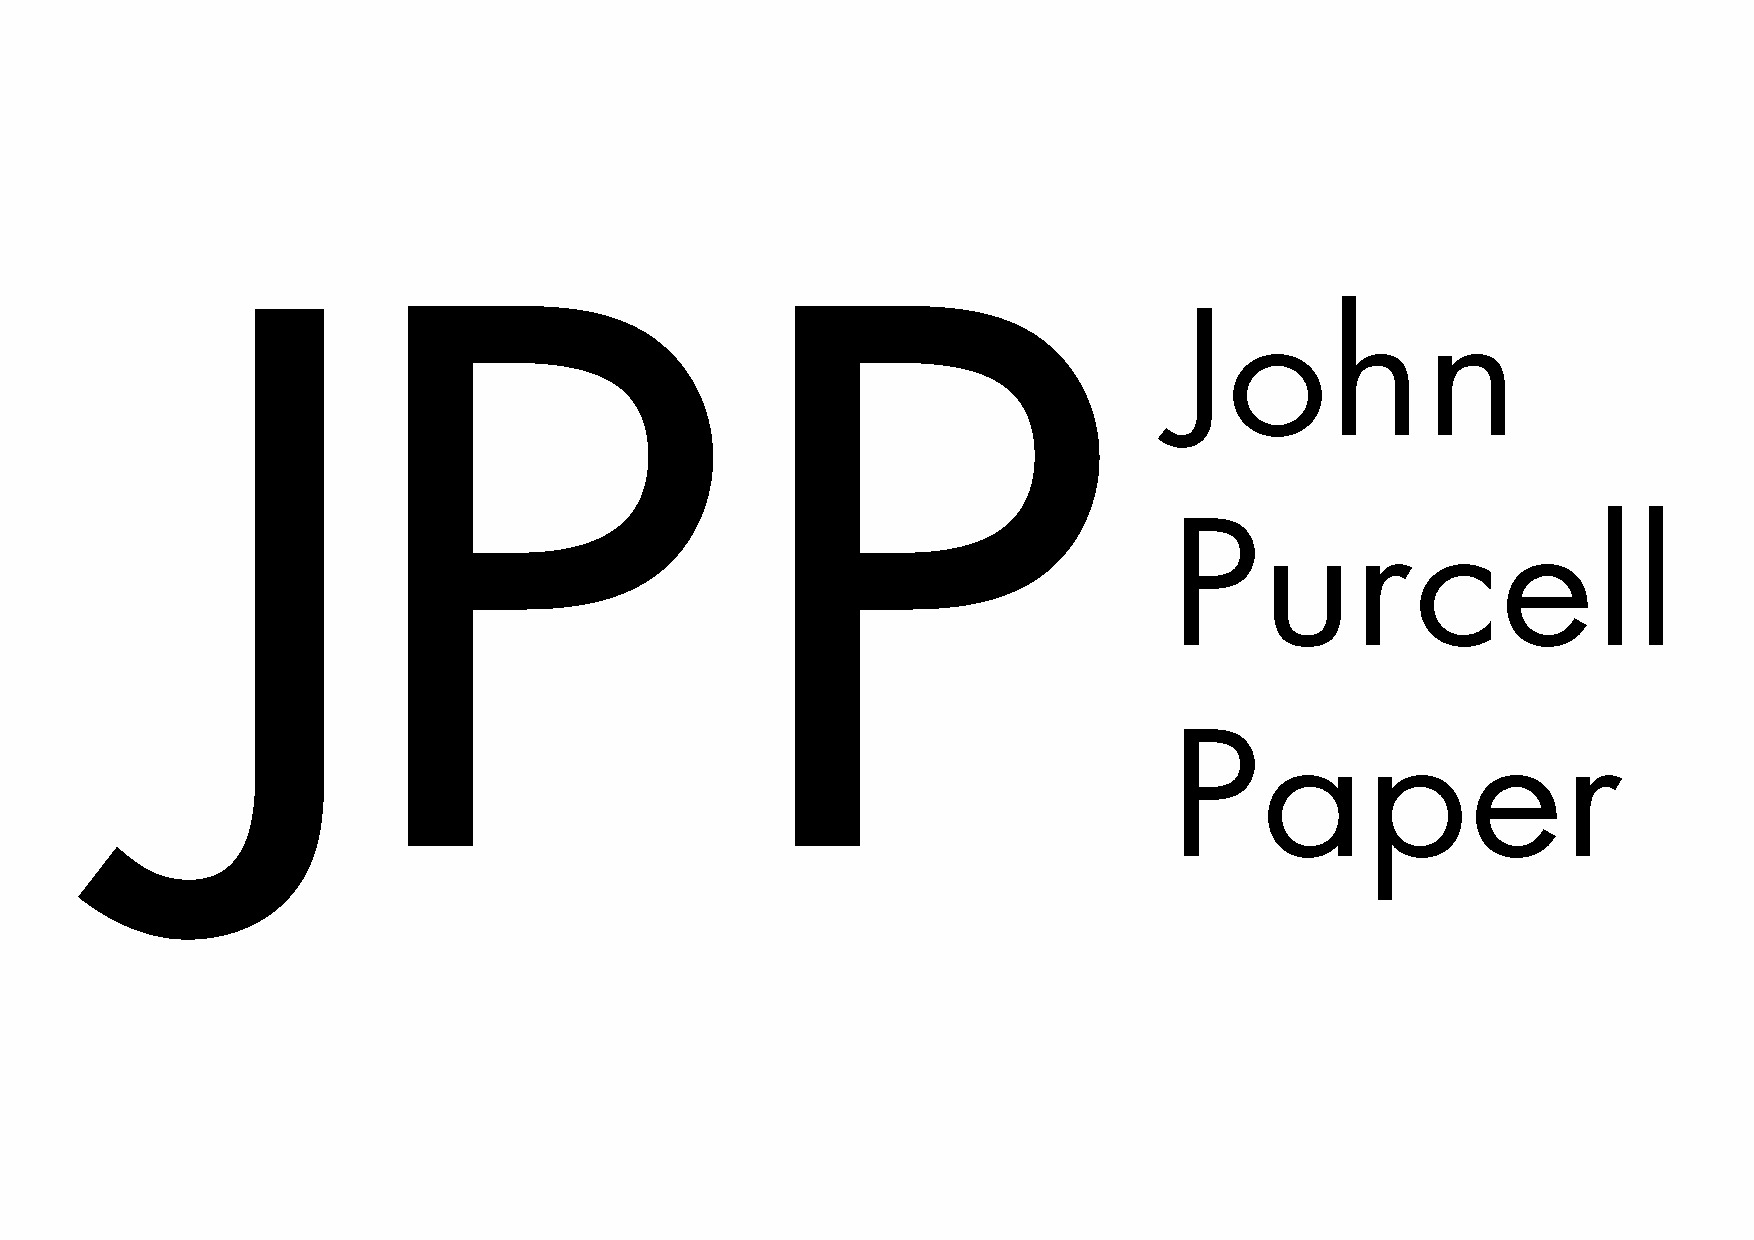 John Purcell Paper